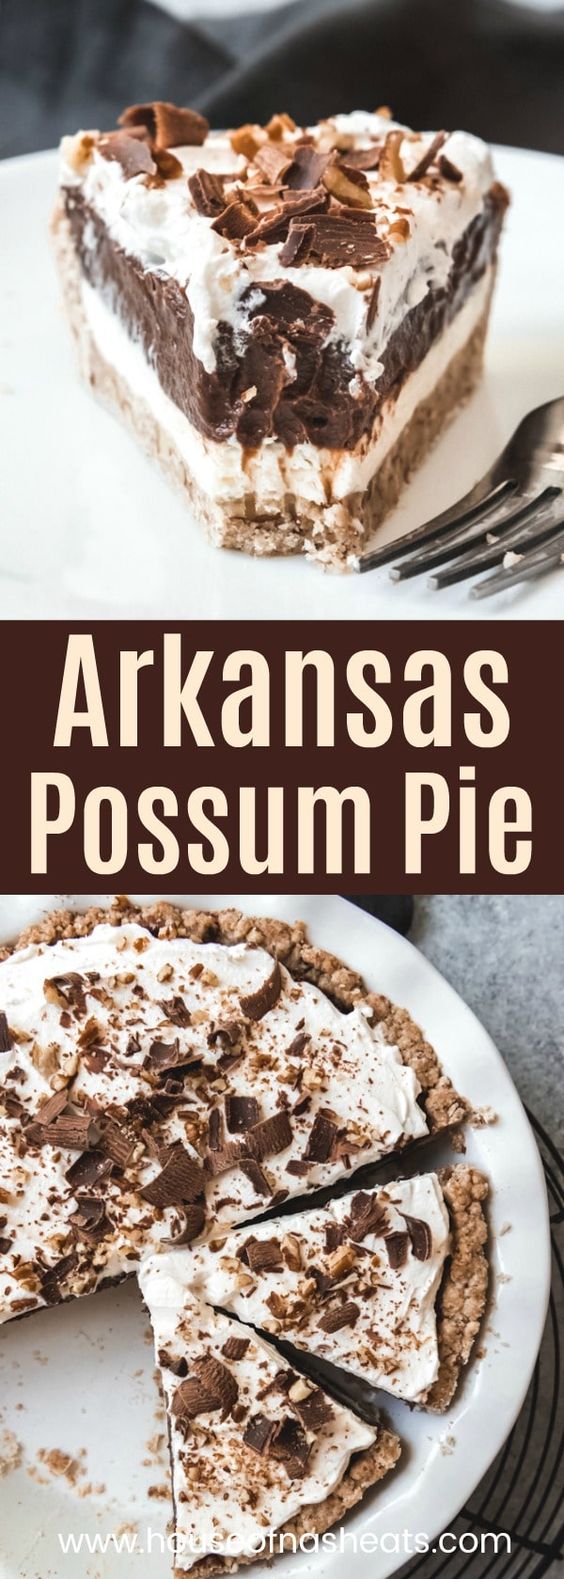 Arkansas Possum Pie is a creamy, layered chocolate and cream cheese pie in a pecan shortbread crust that is sure to please!